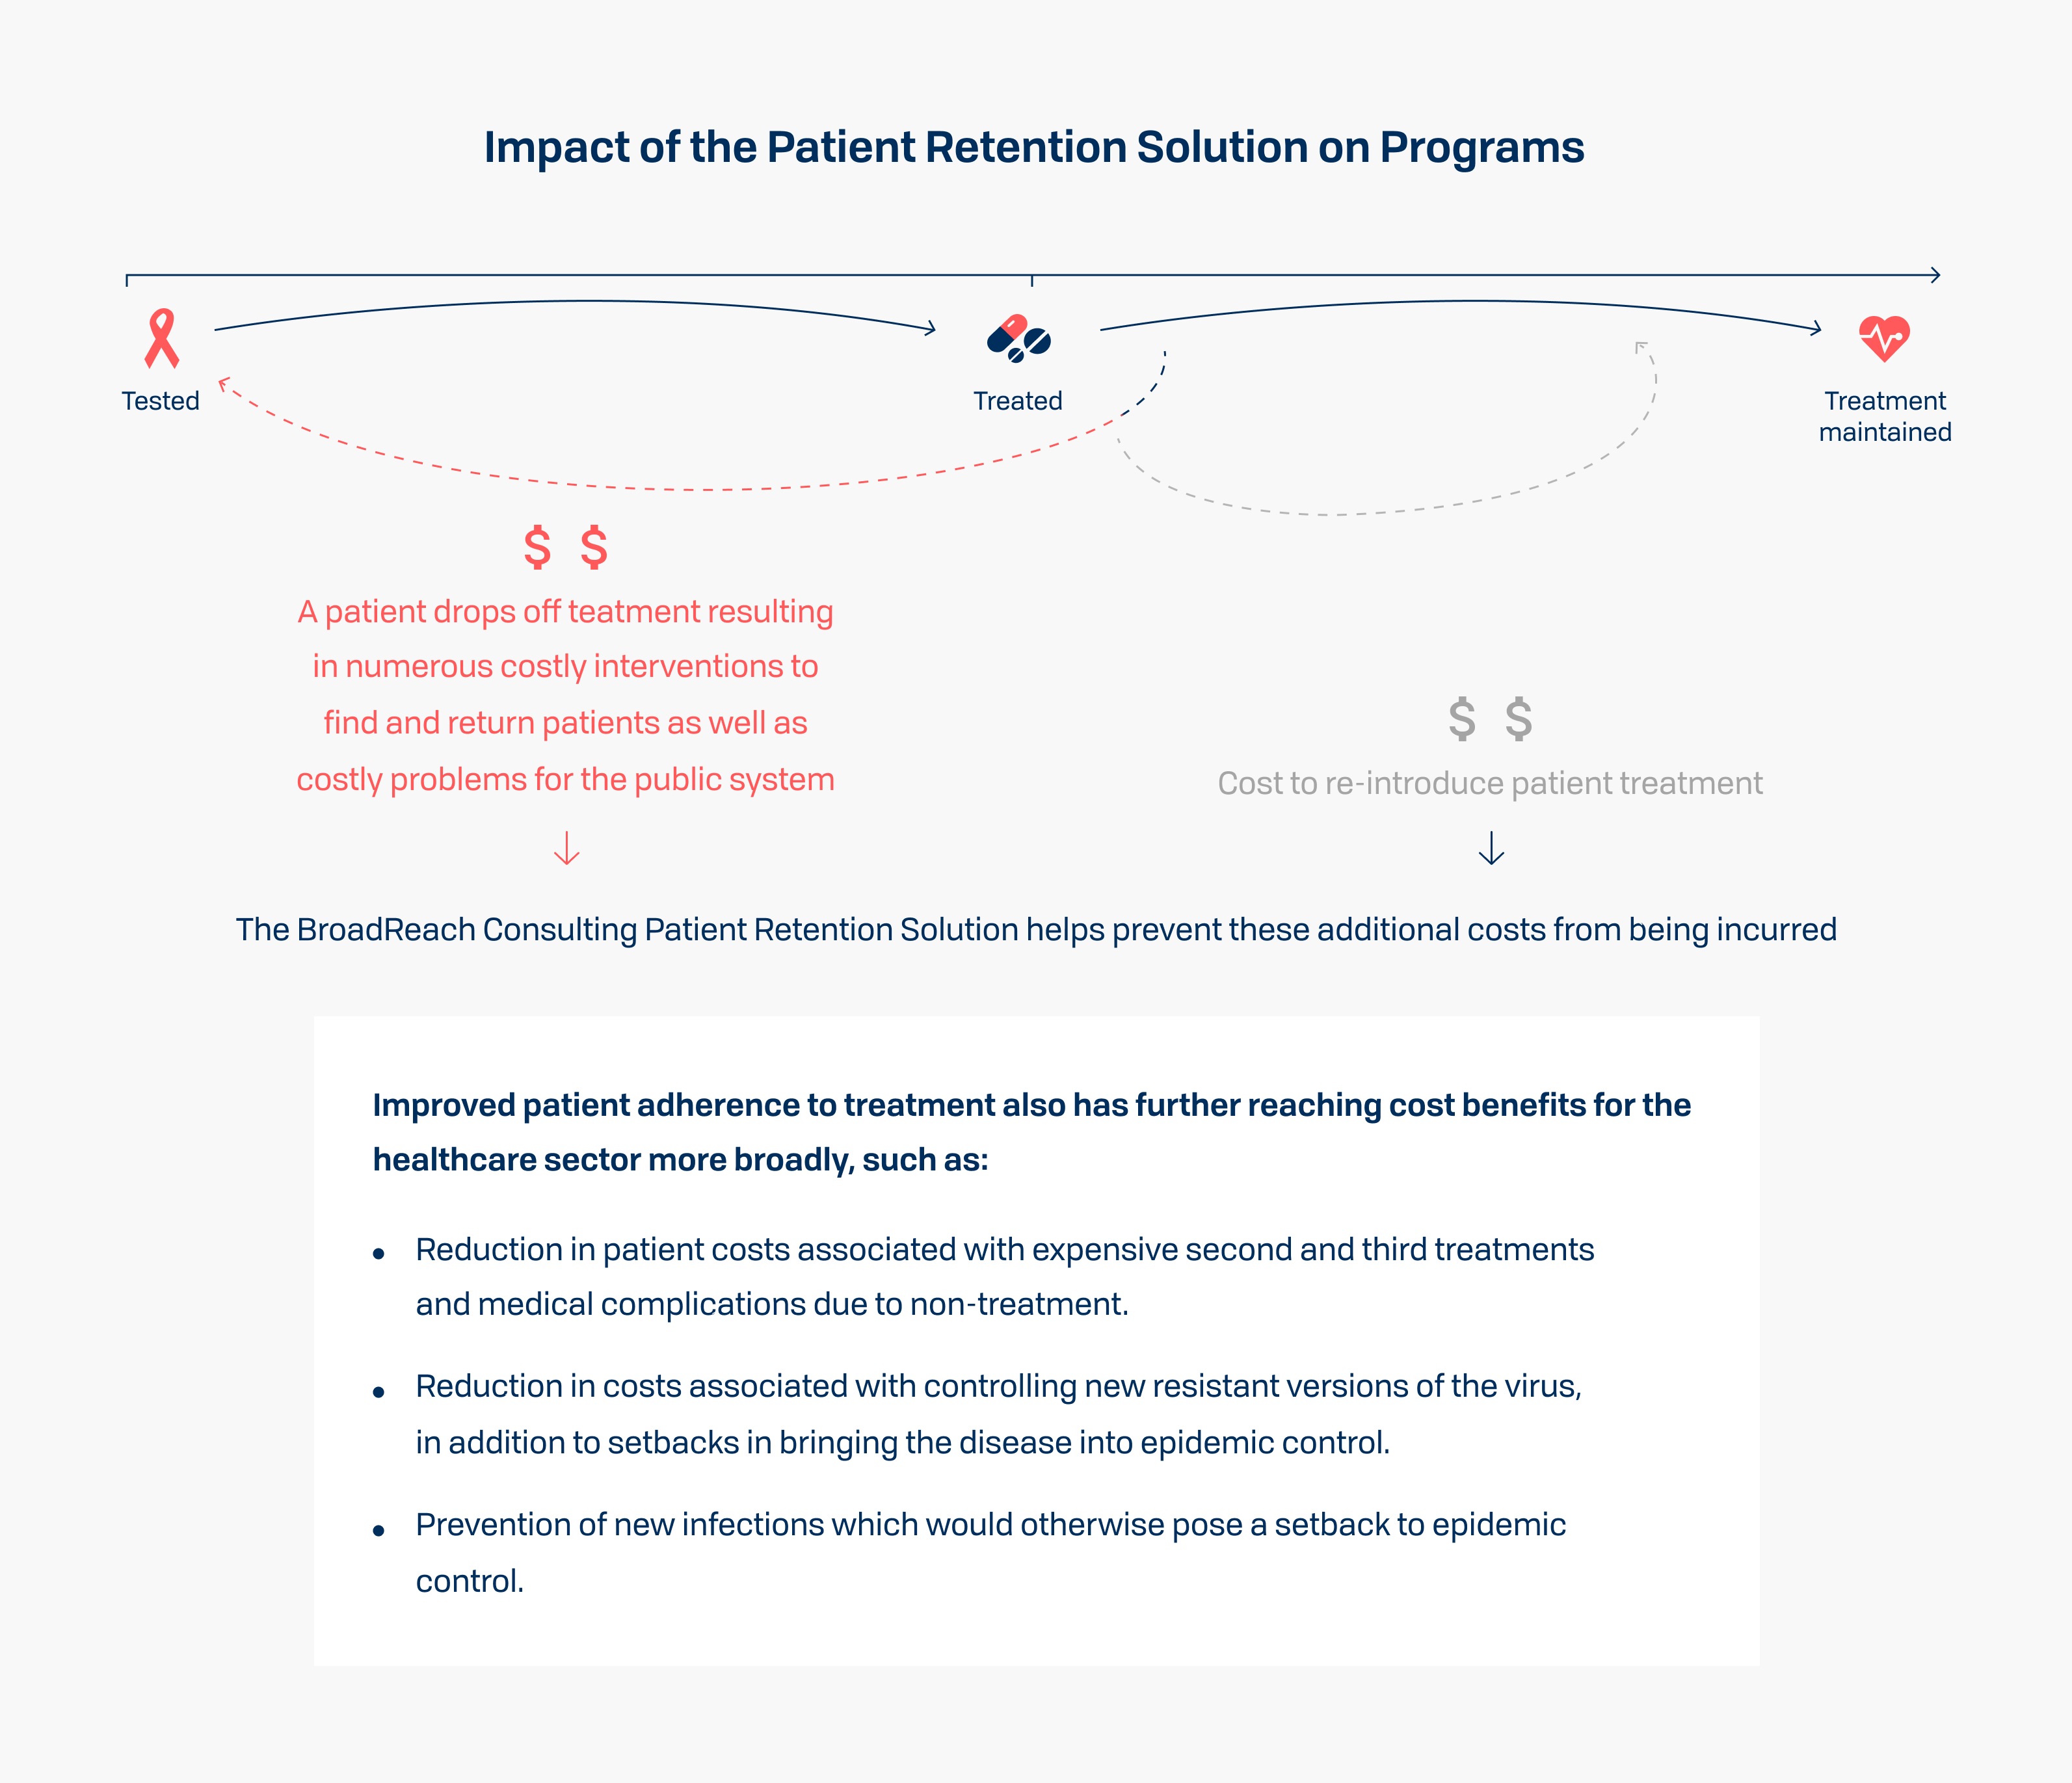 Impact of the Patient Retention Solution on Programs - Costs